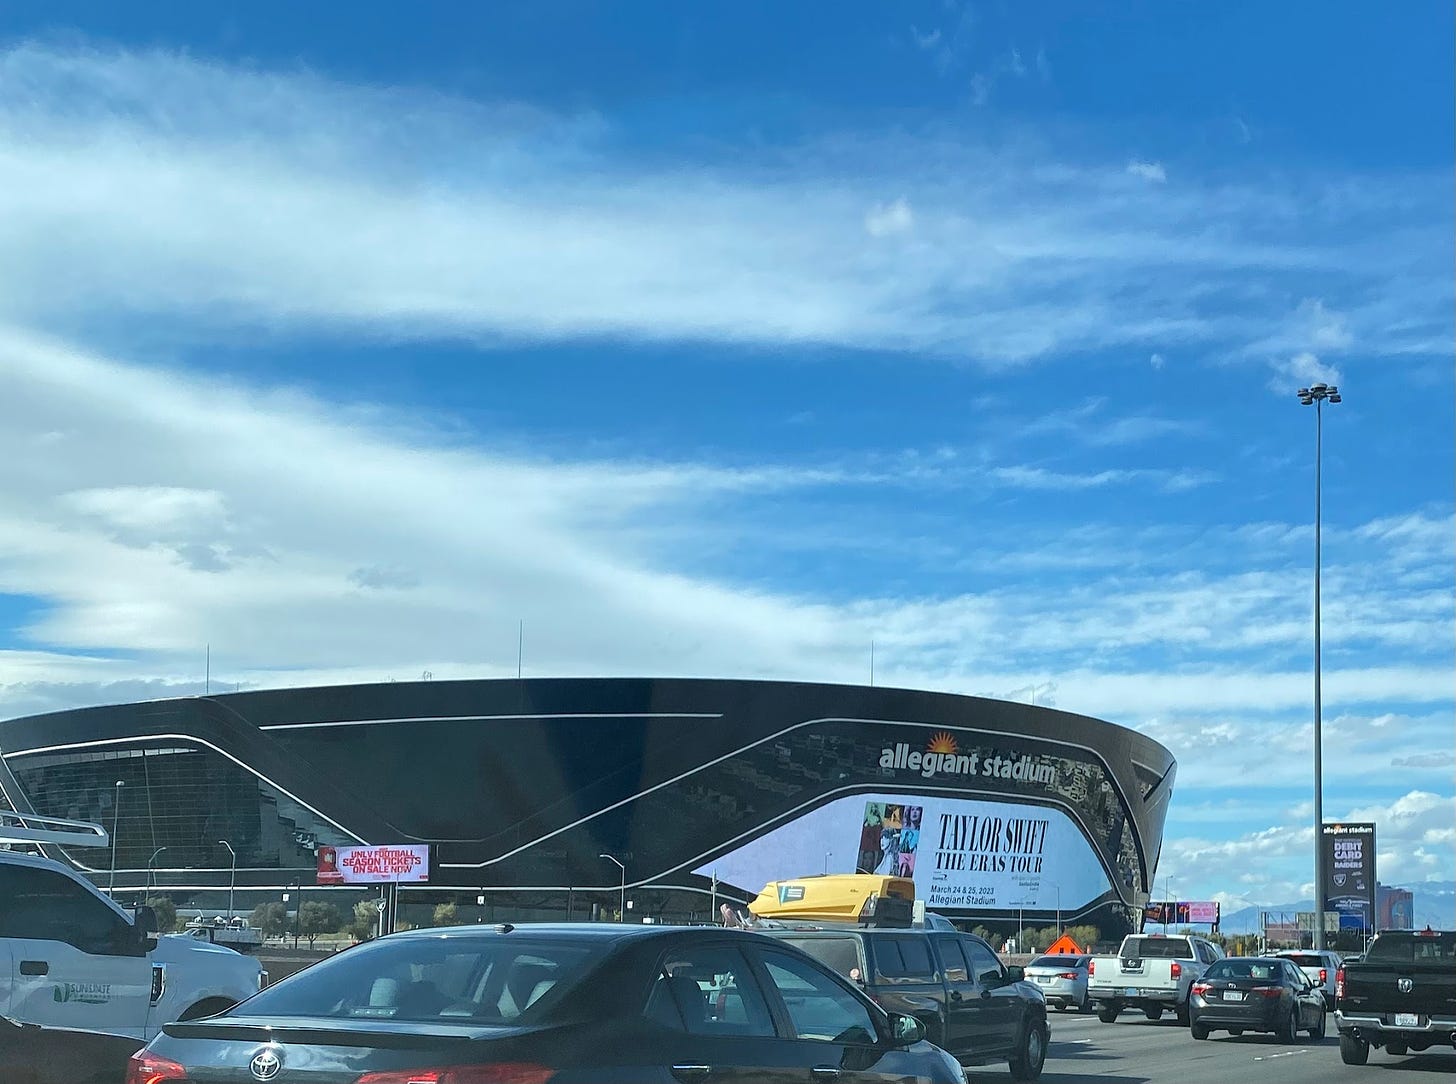 Allegiant Stadium with an ad for Taylor Swift's The Eras Tour on its screen, taken from the highway.